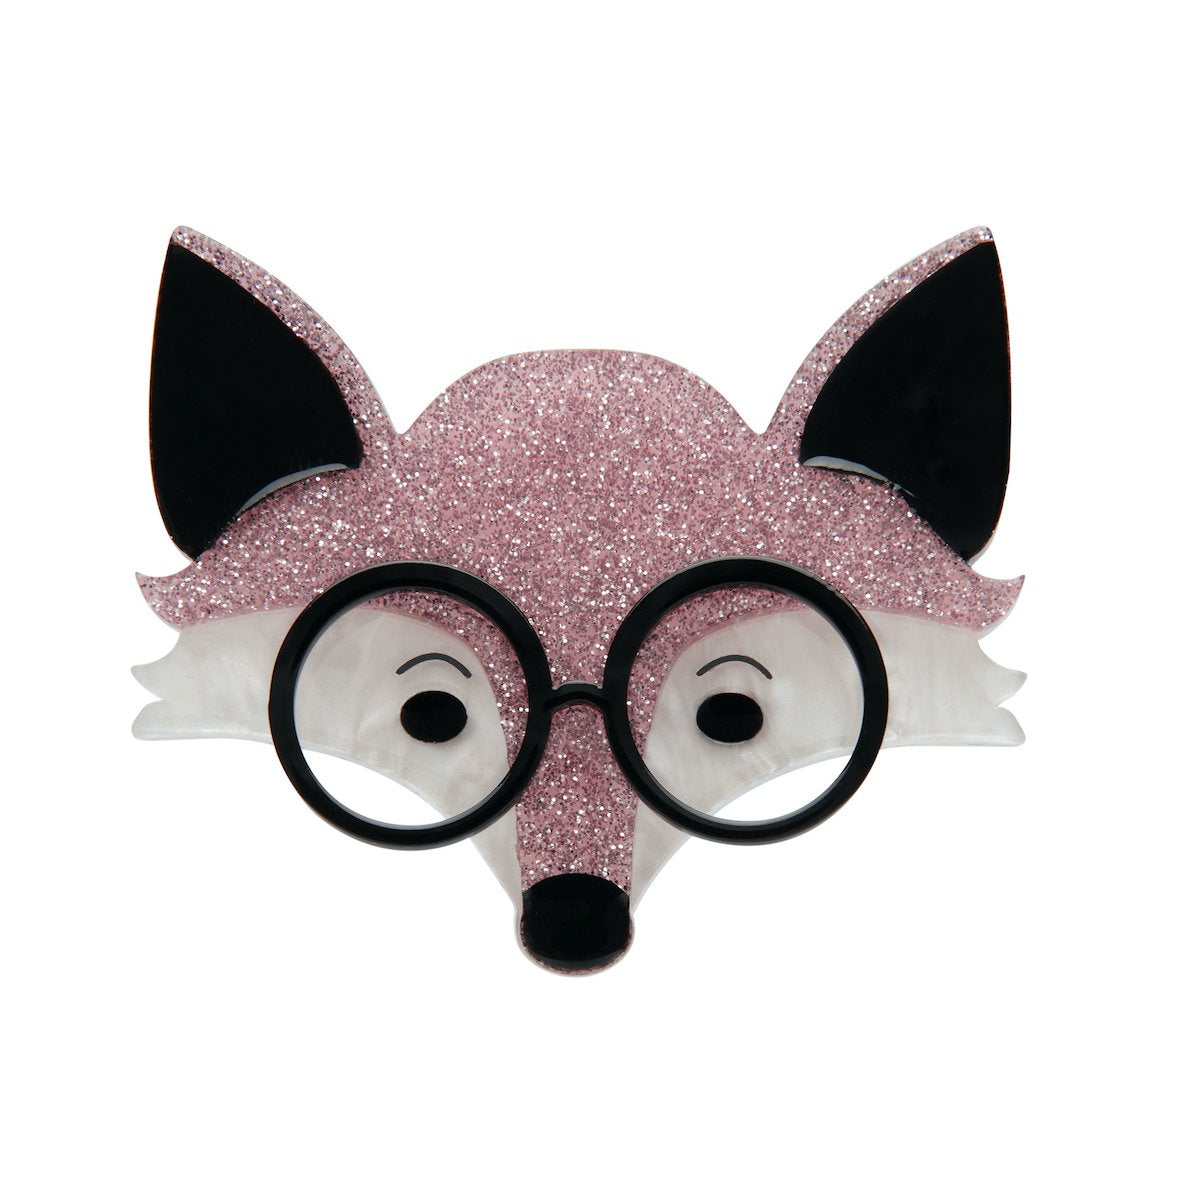 pale pink glitter, black, and white glasses-wearing fox face layered resin brooch